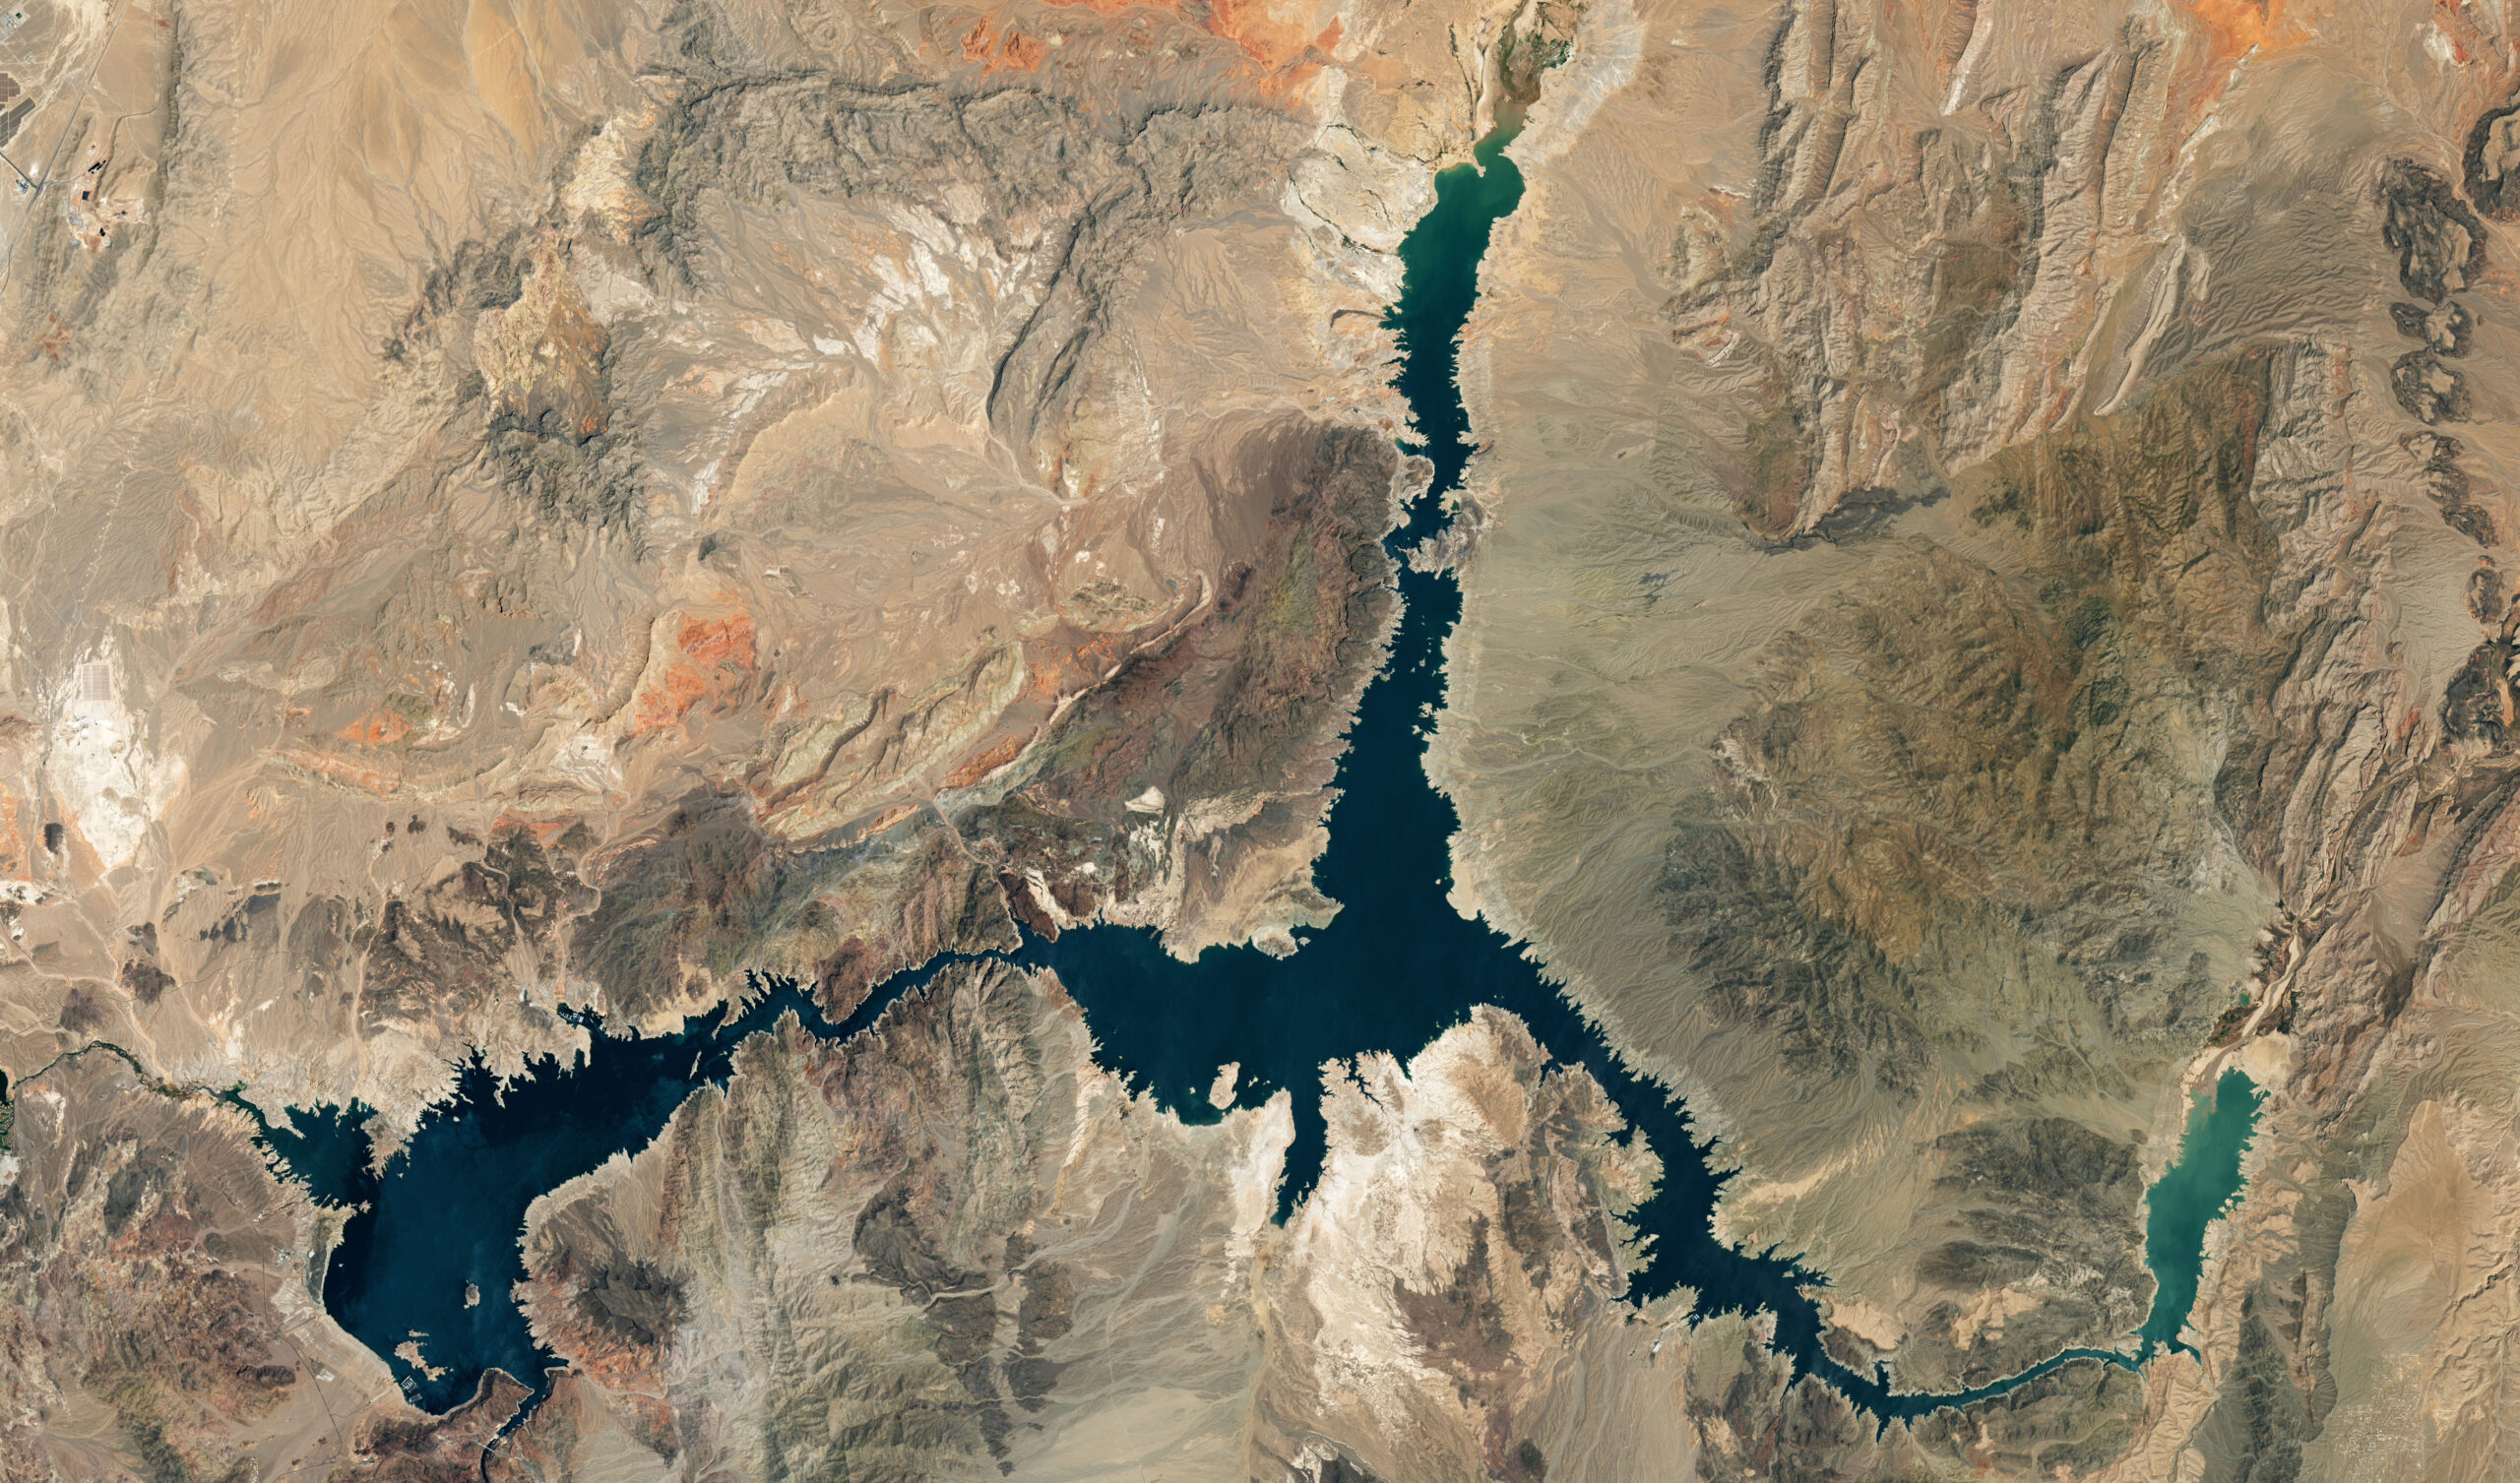 Lake Mead satellite images showing water level